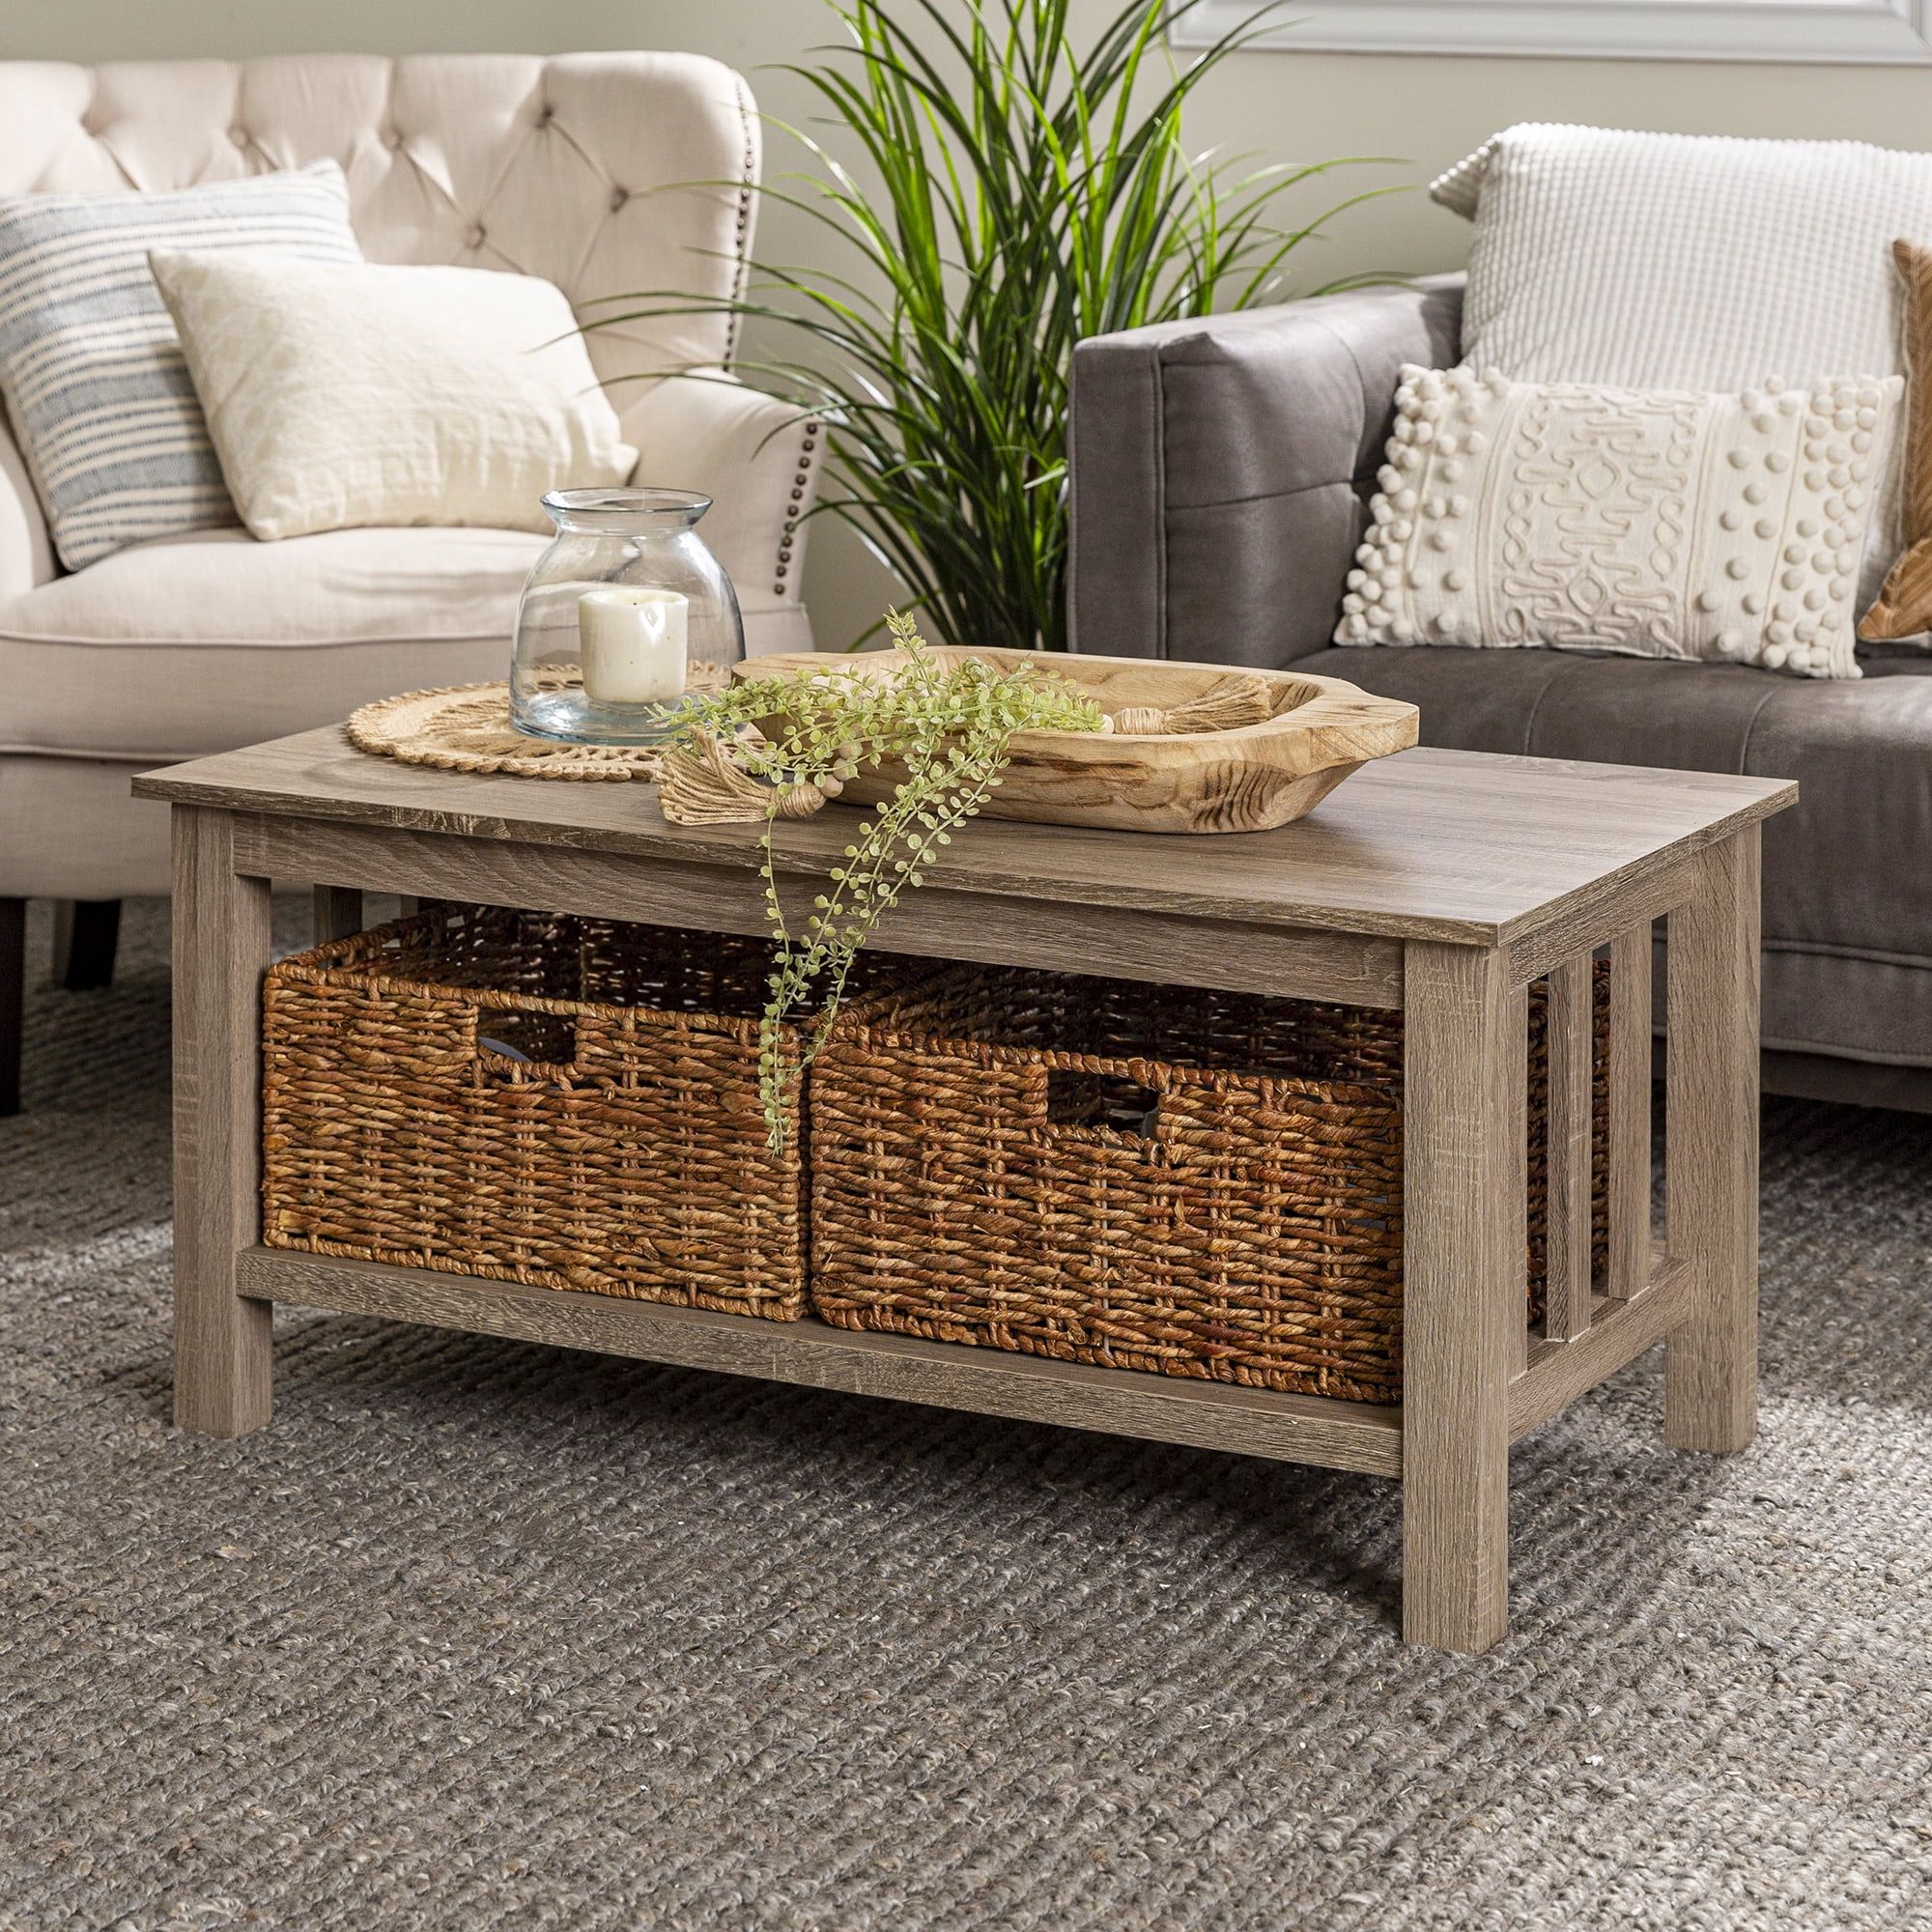 Most Popular Woven Paths Coffee Tables With Regard To Woven Paths Traditional Storage Coffee Table With Bins, Driftwood –  Walmart (View 3 of 10)